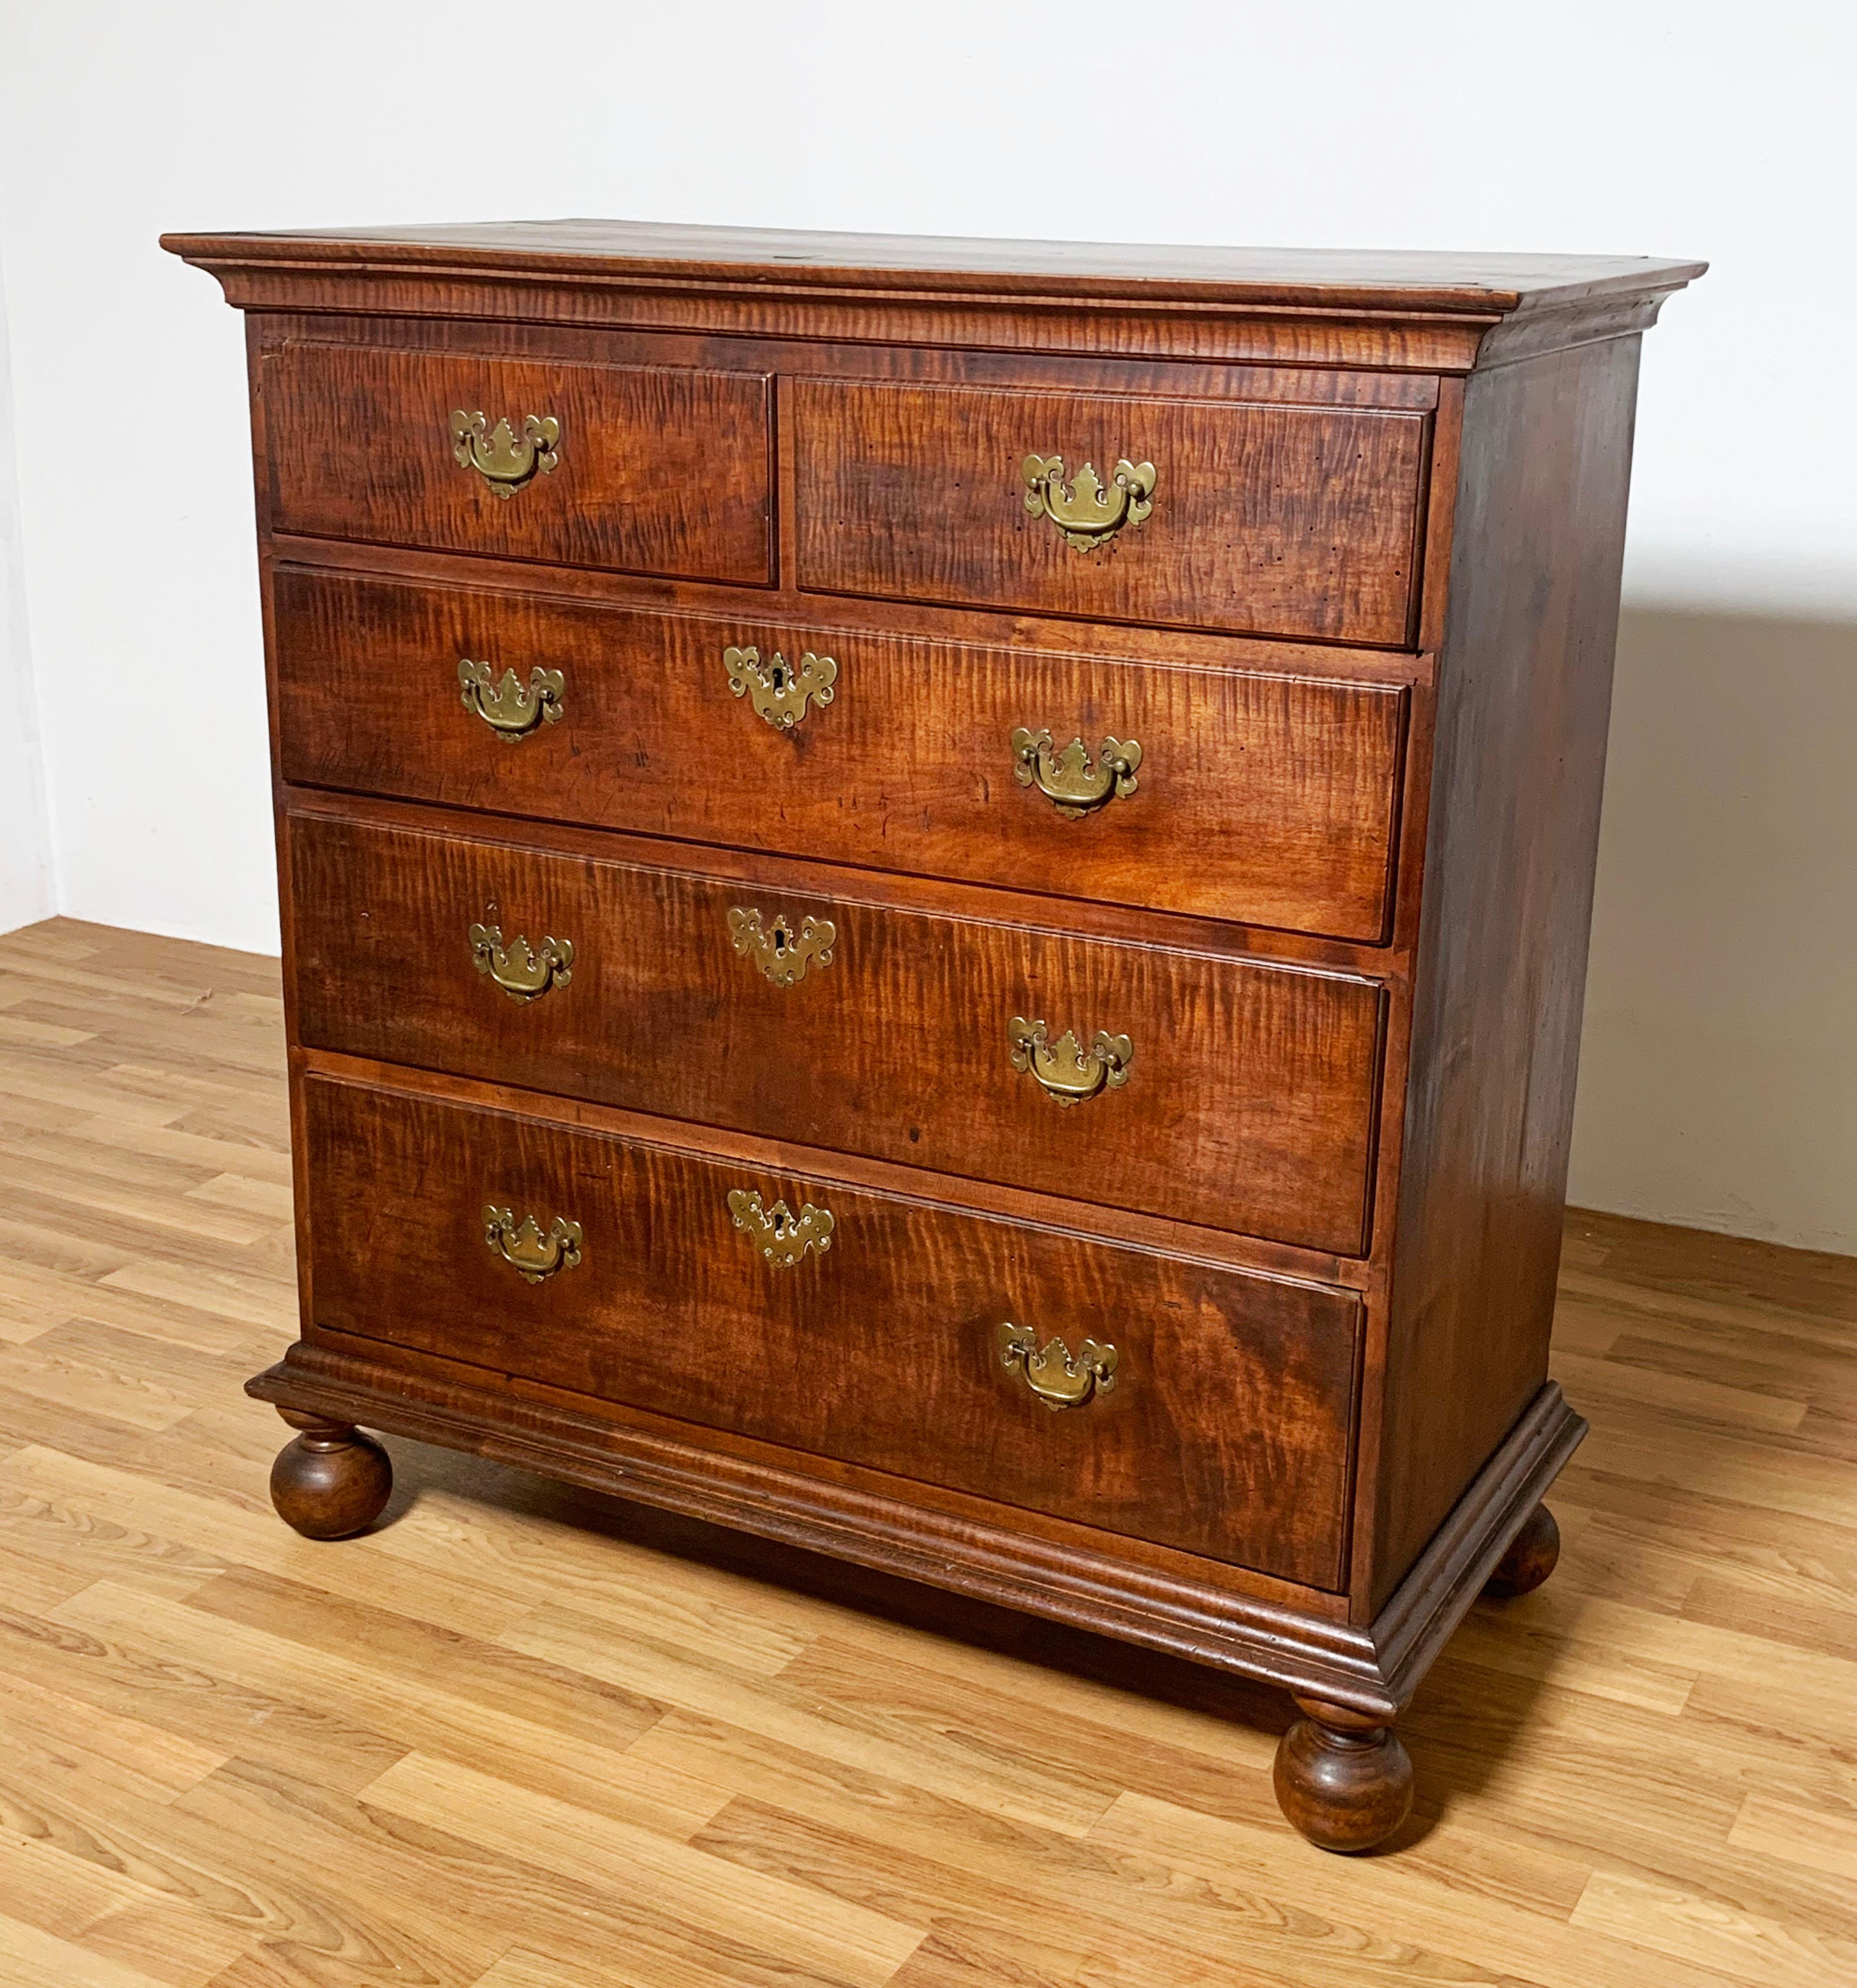 Antique 18th century Rhode Island chest in flamed maple on ball feet with original brasses, ca. 1740. The construction of two flanking drawers over three of graduated size and the top and bottom moldings are a striking feature of this early American